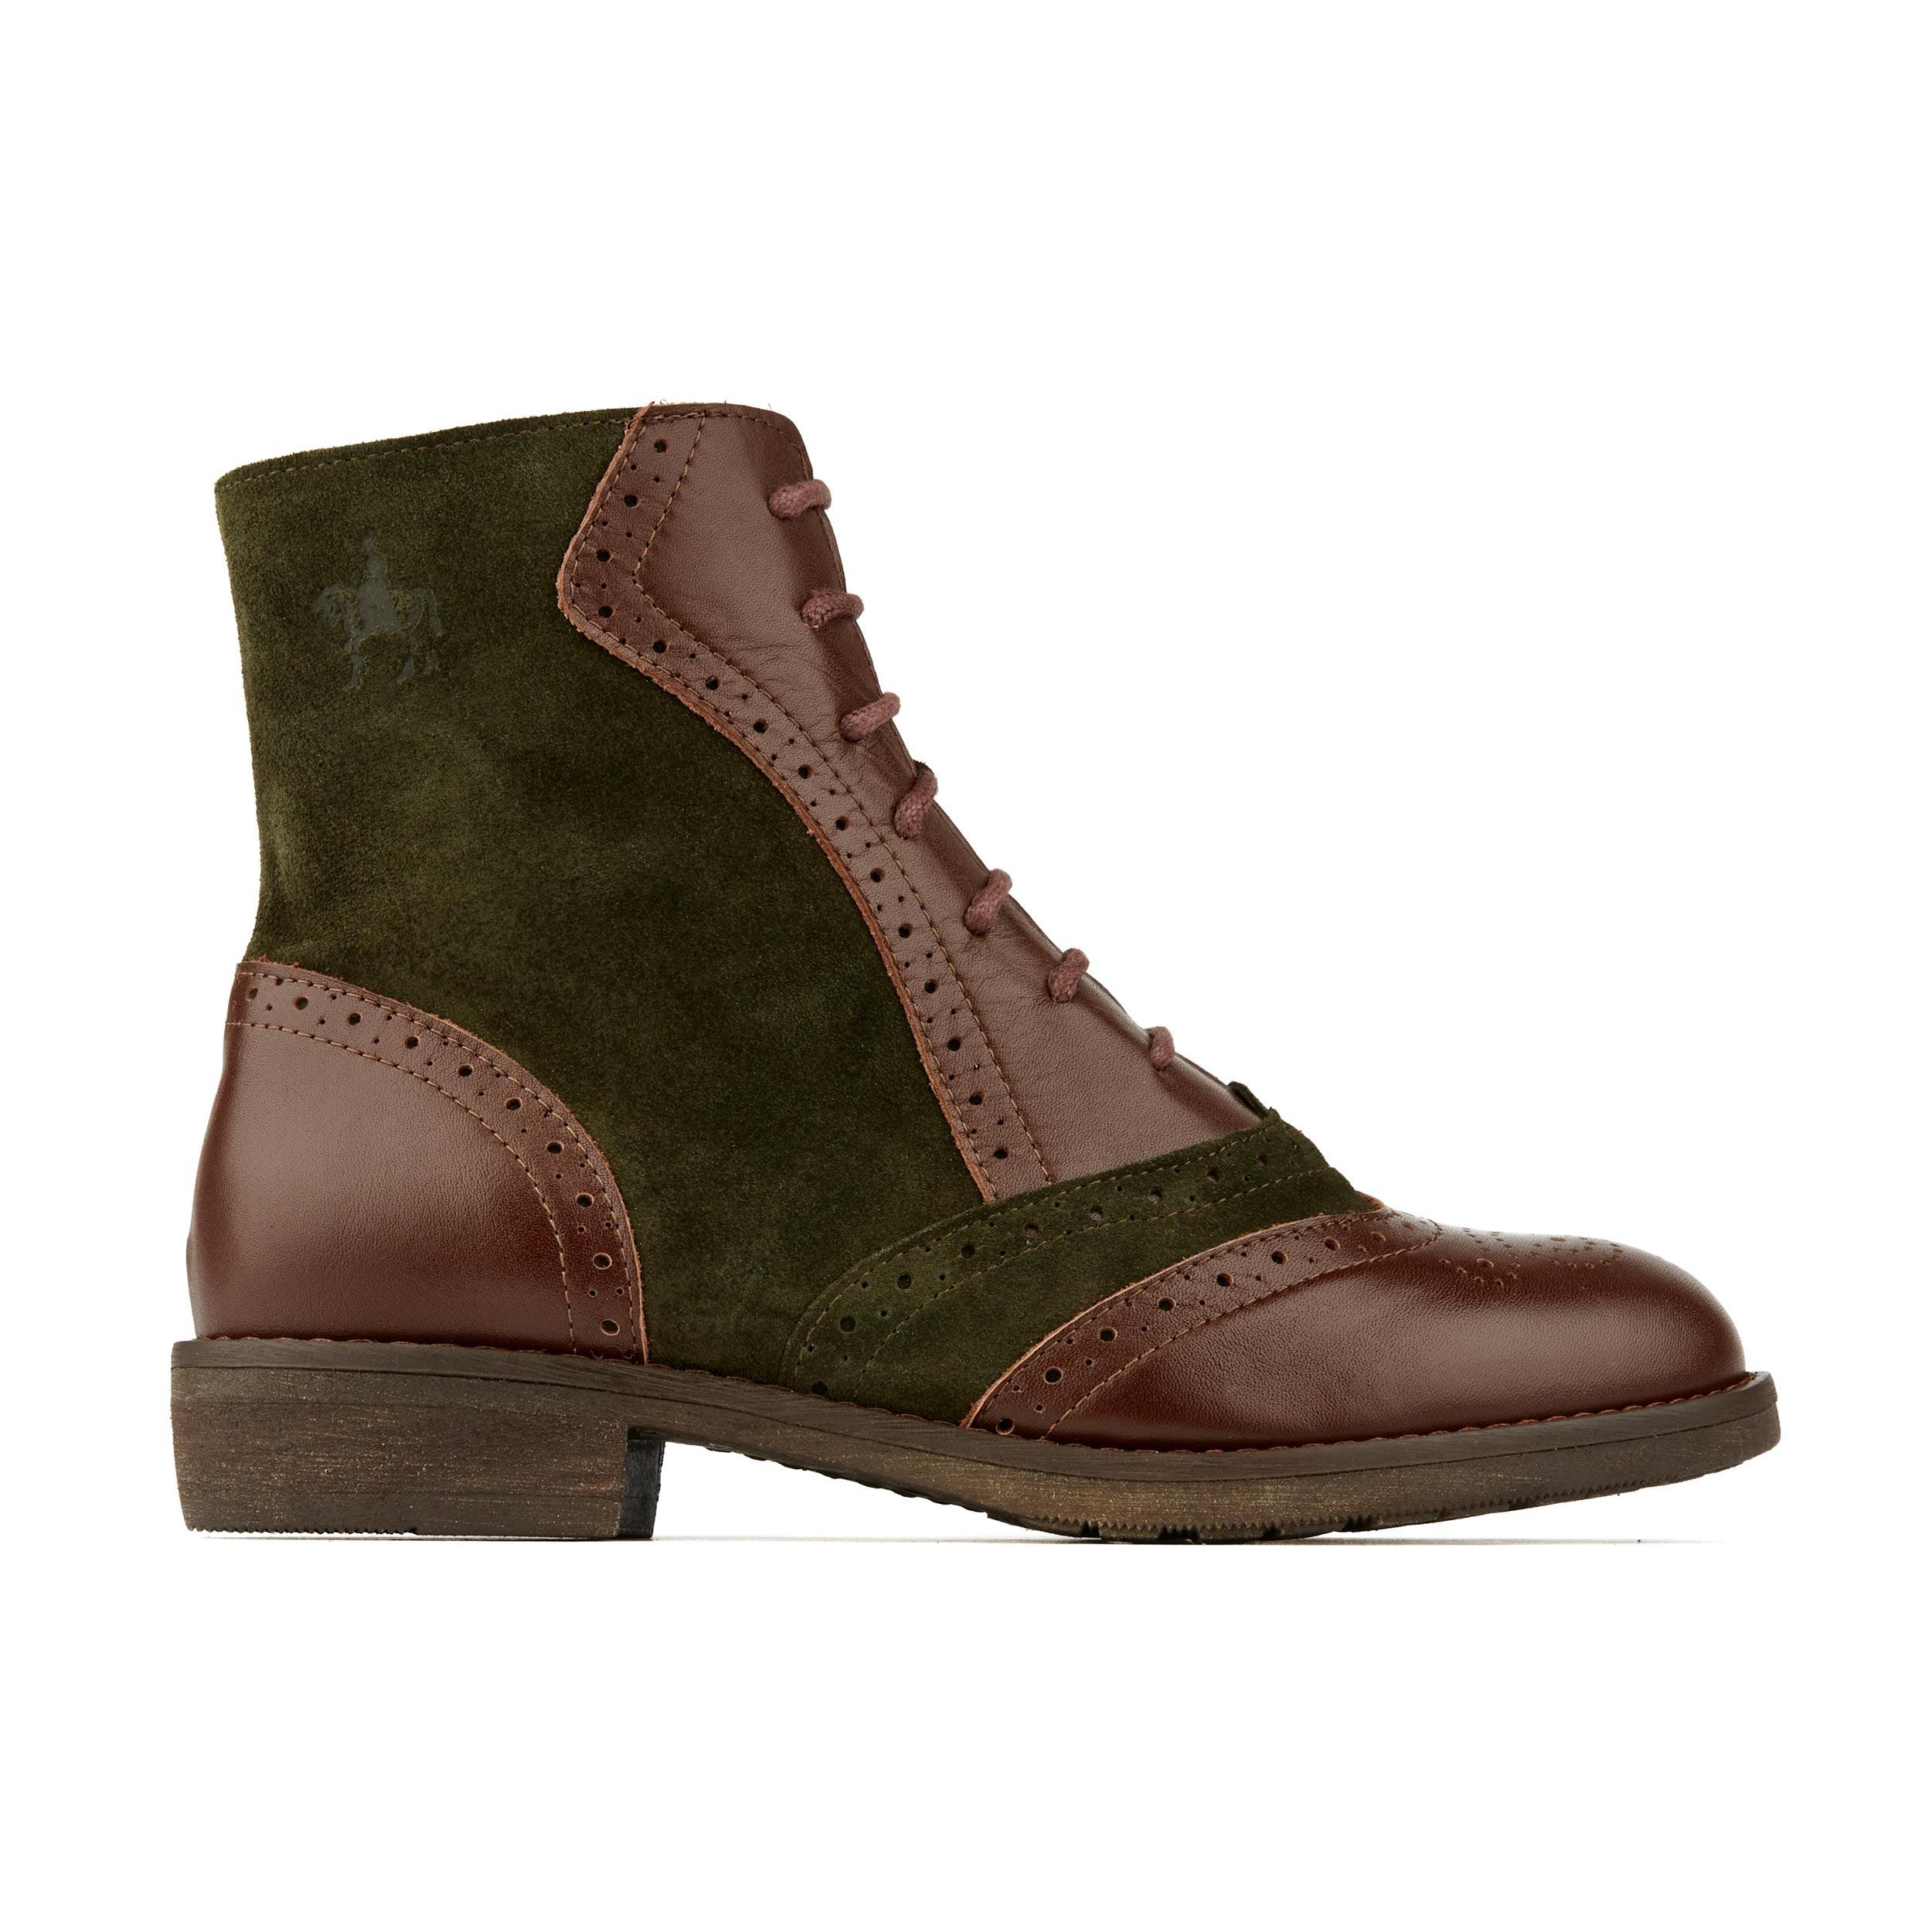 Embassy London Brick Lane Boots in Brown | Lyst